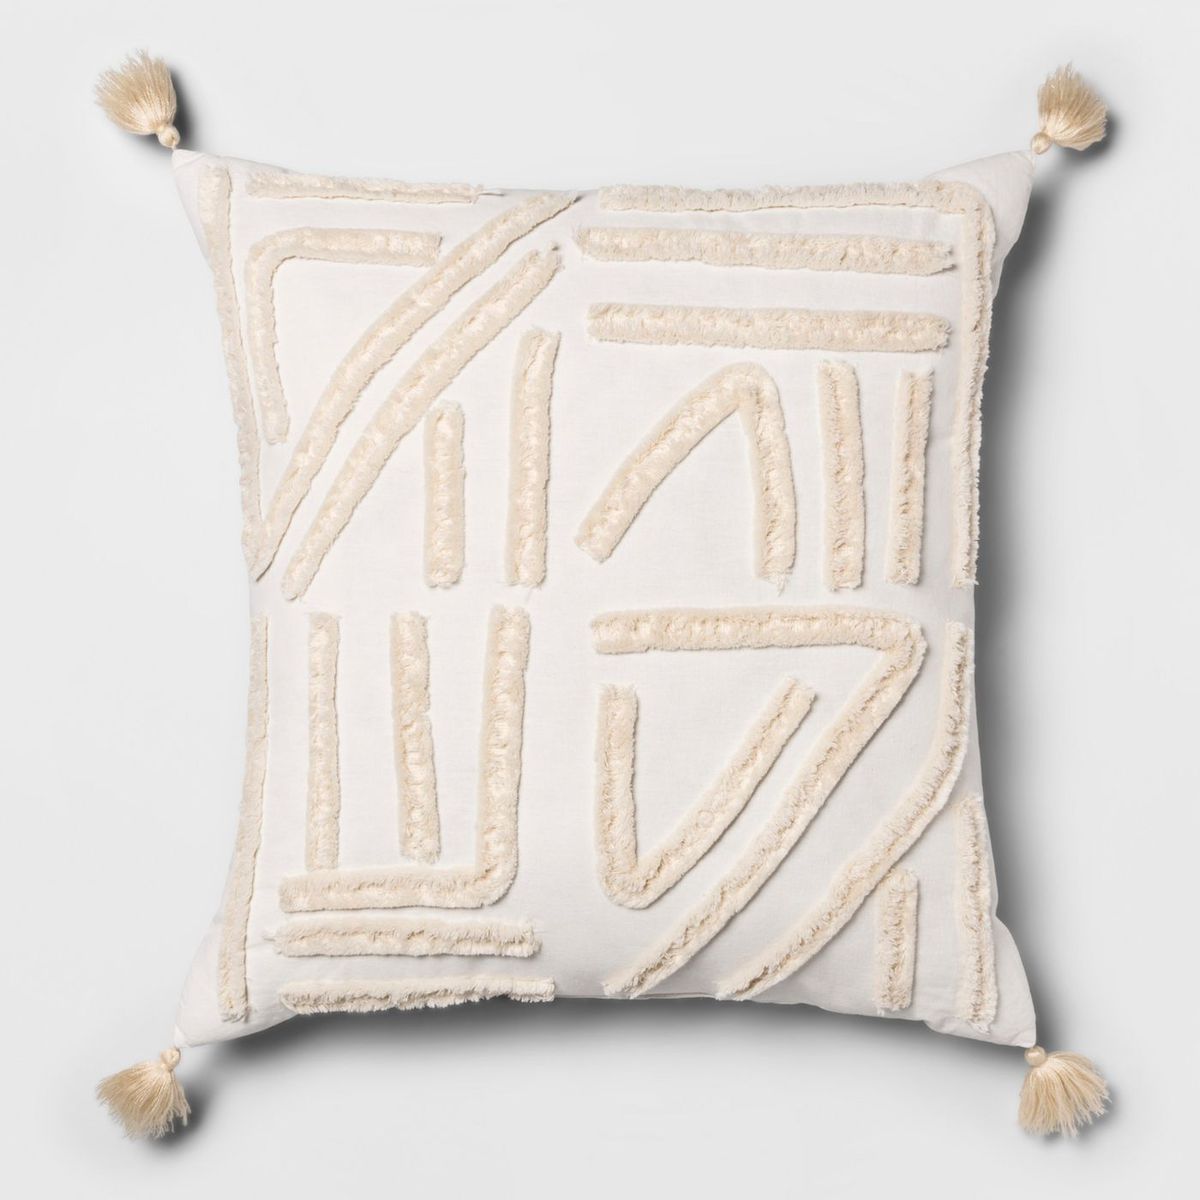 Beige pillow with tassels. 